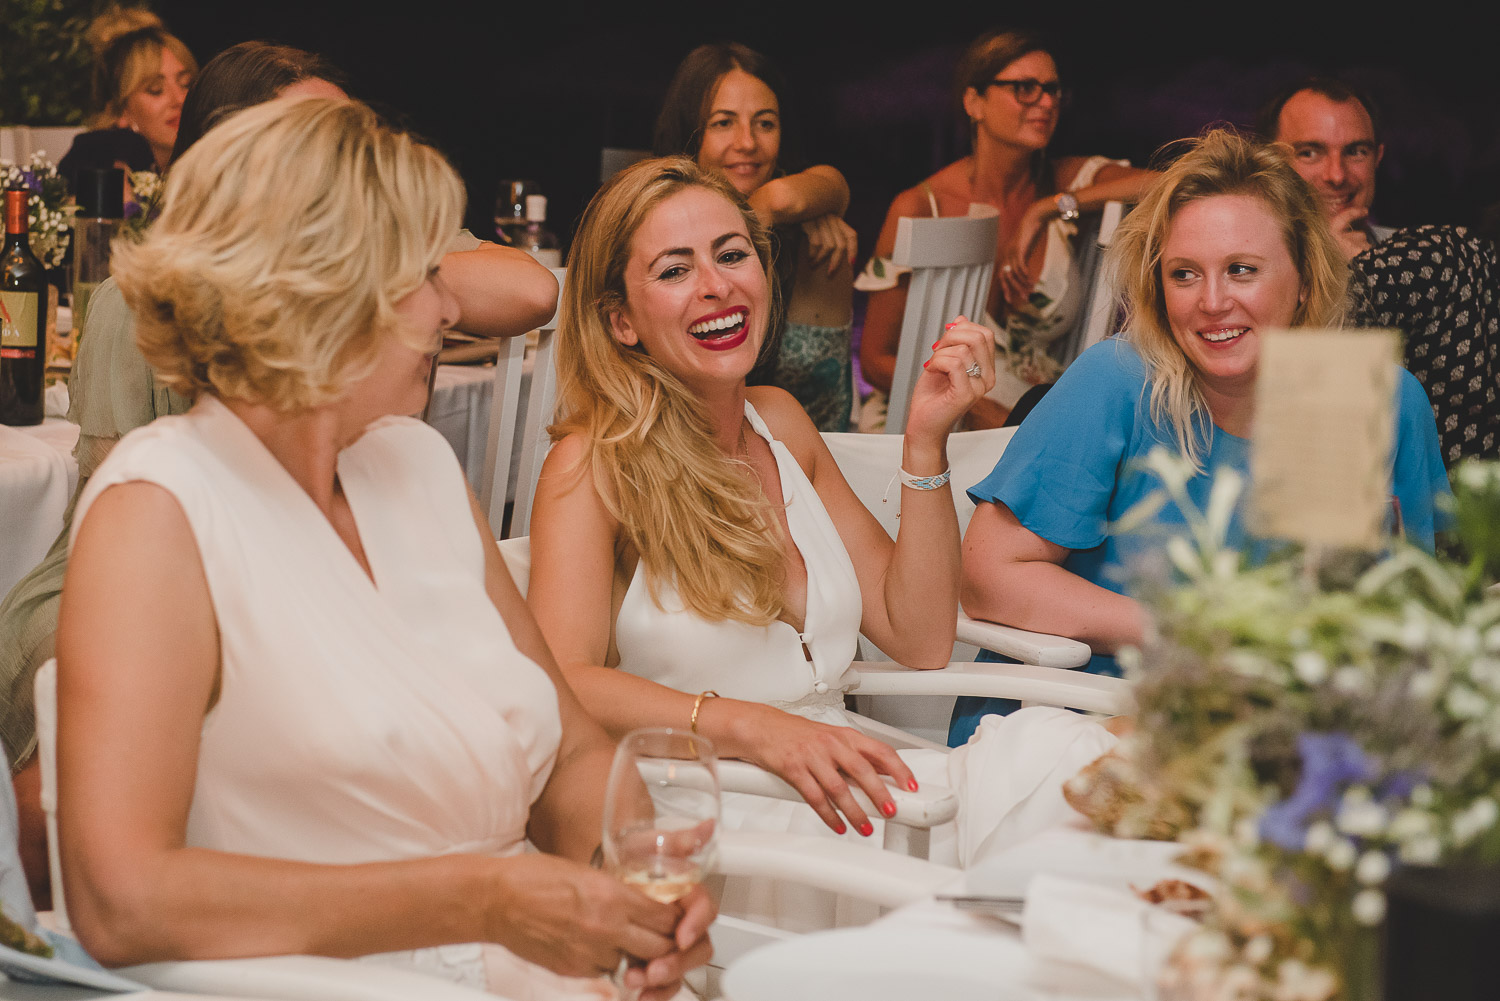 Wedding photographer Mykonos: bride and friends laughing during speeches at Elia for Mykonos wedding reception.